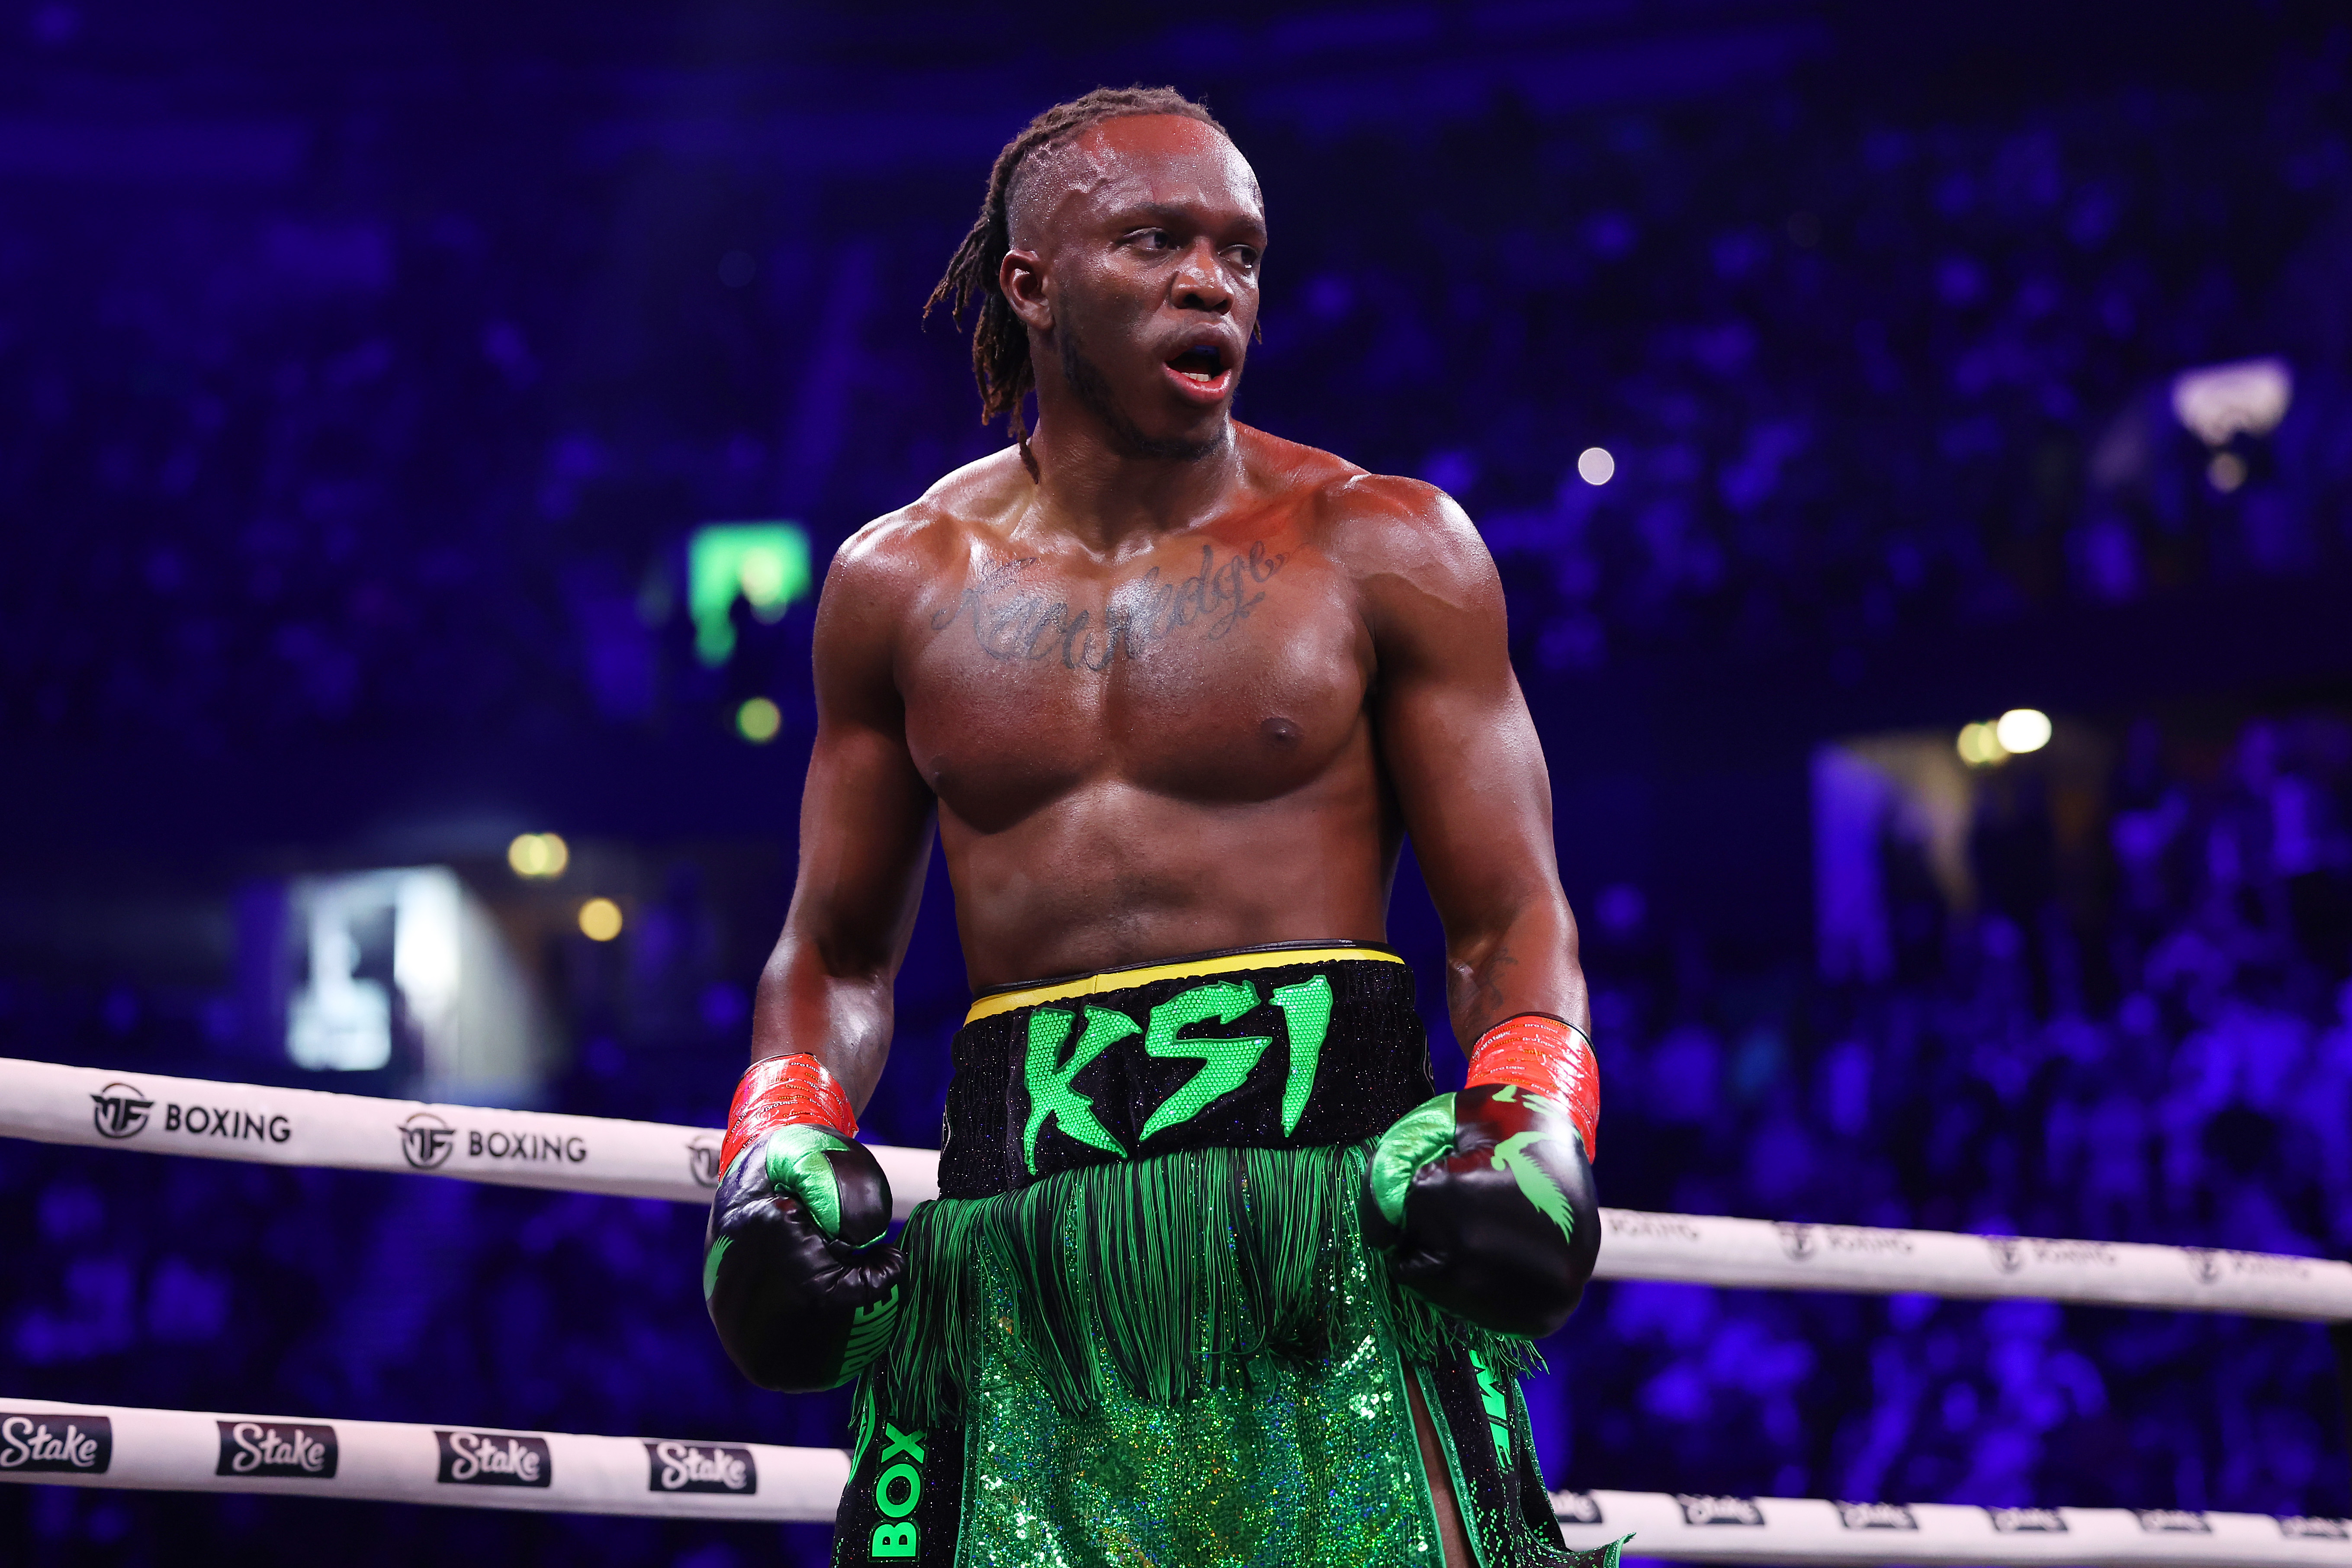 KSI suffered defeat to Tommy Fury